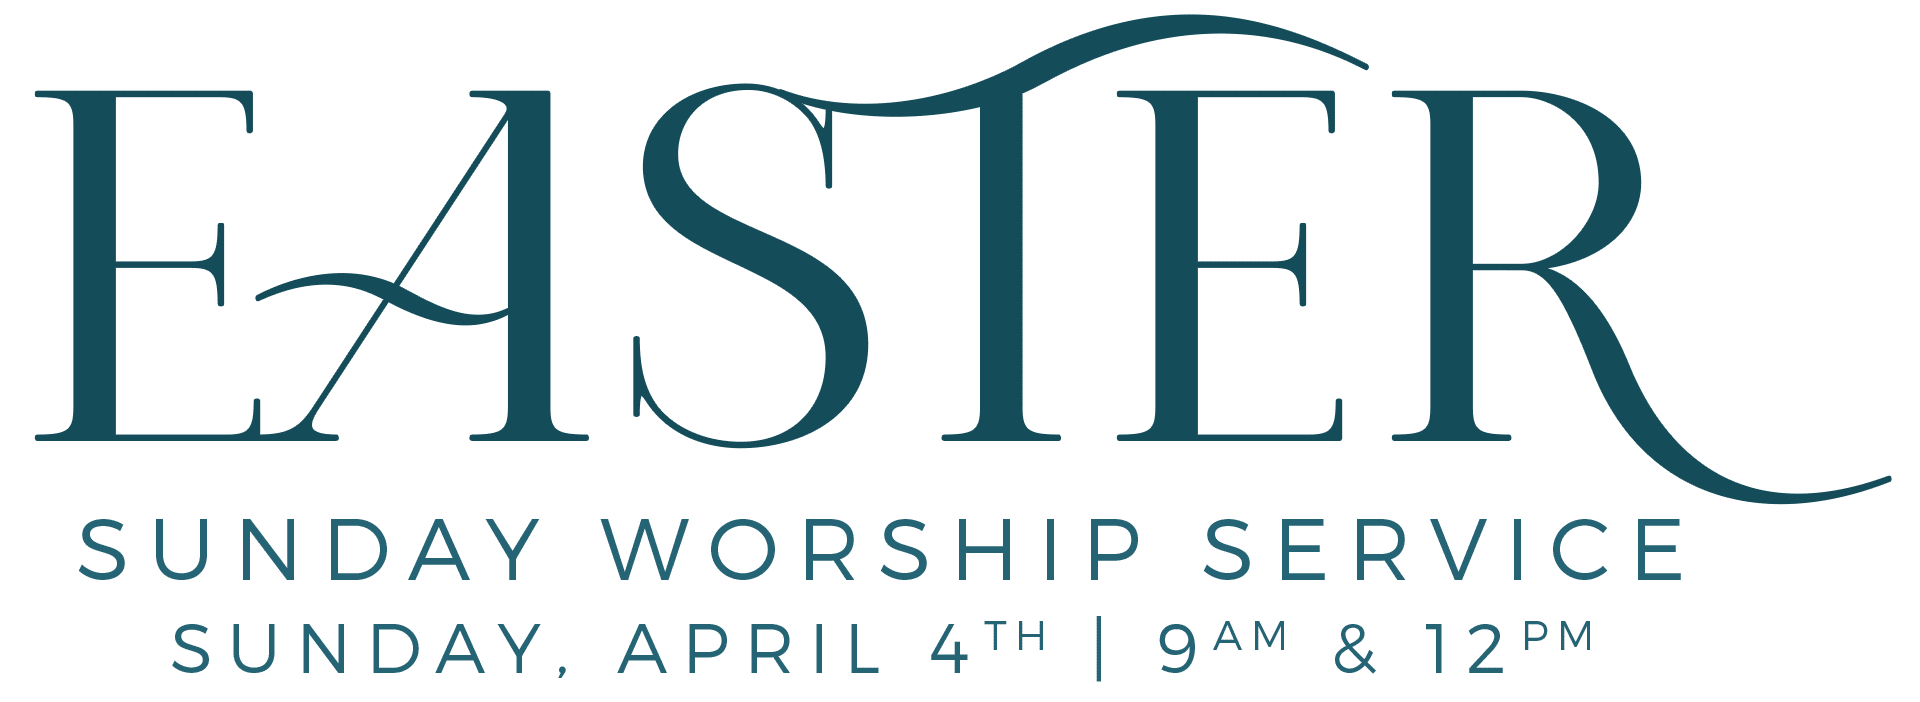 Easter Sunday Worship Service banner